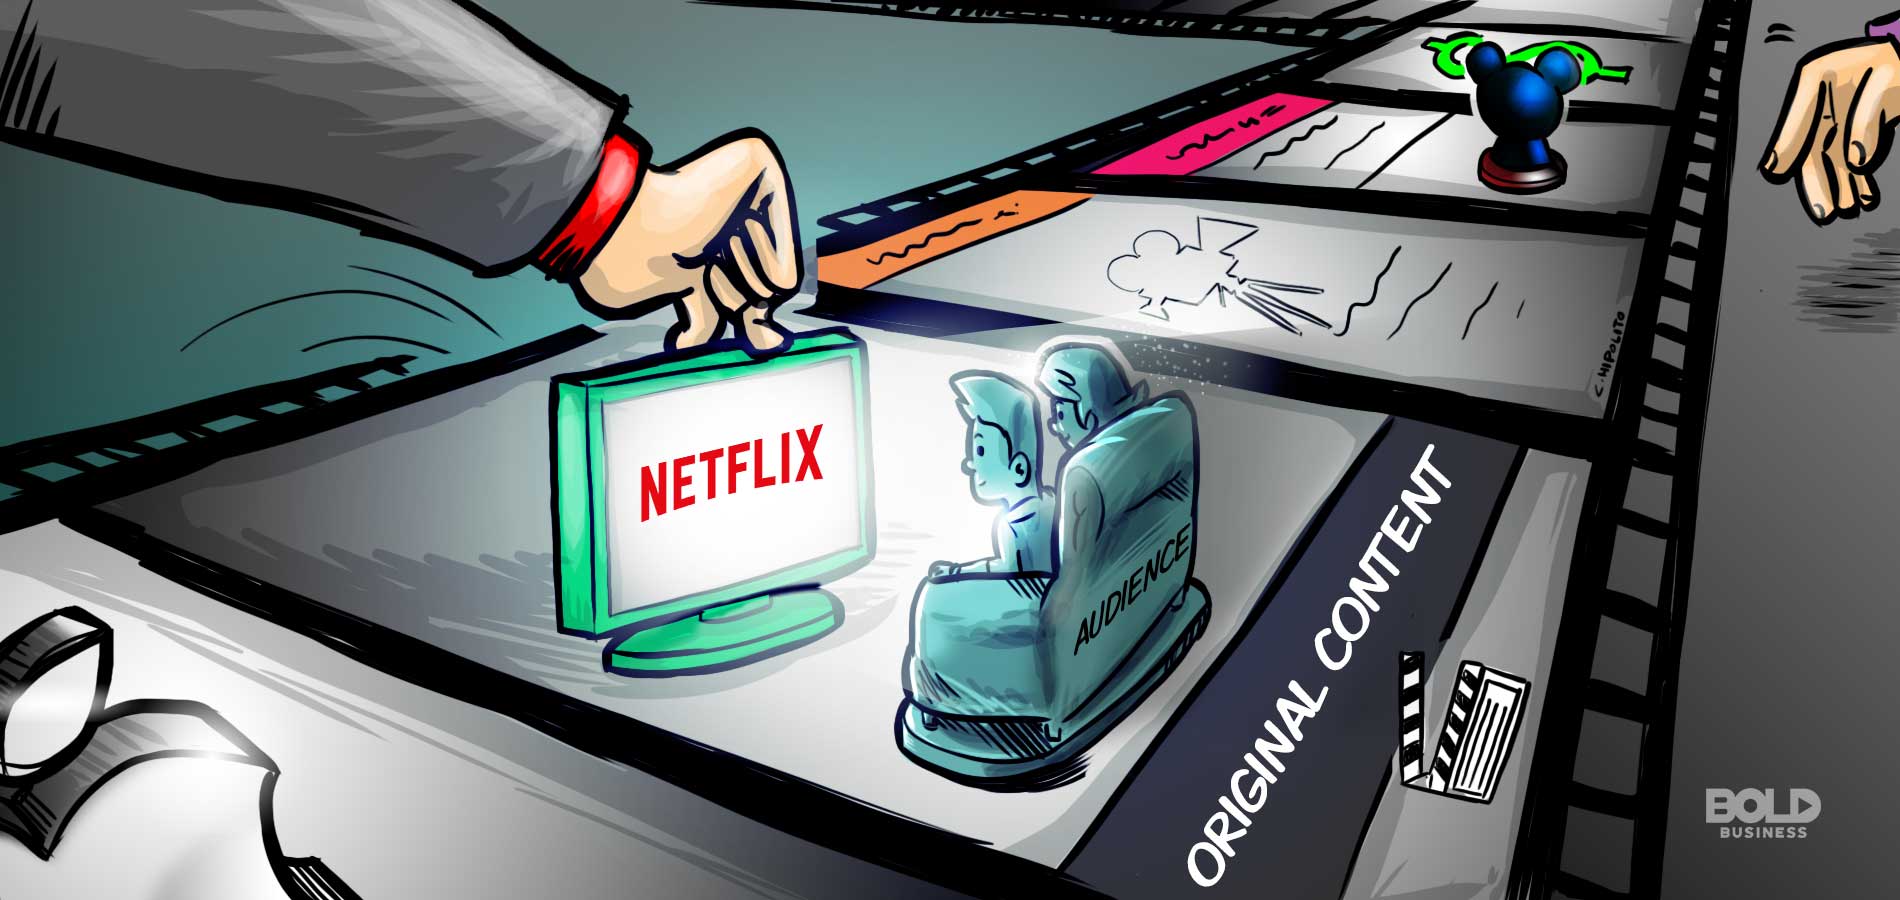 netflix innovating with its original content creation in its platform hooks subscribers